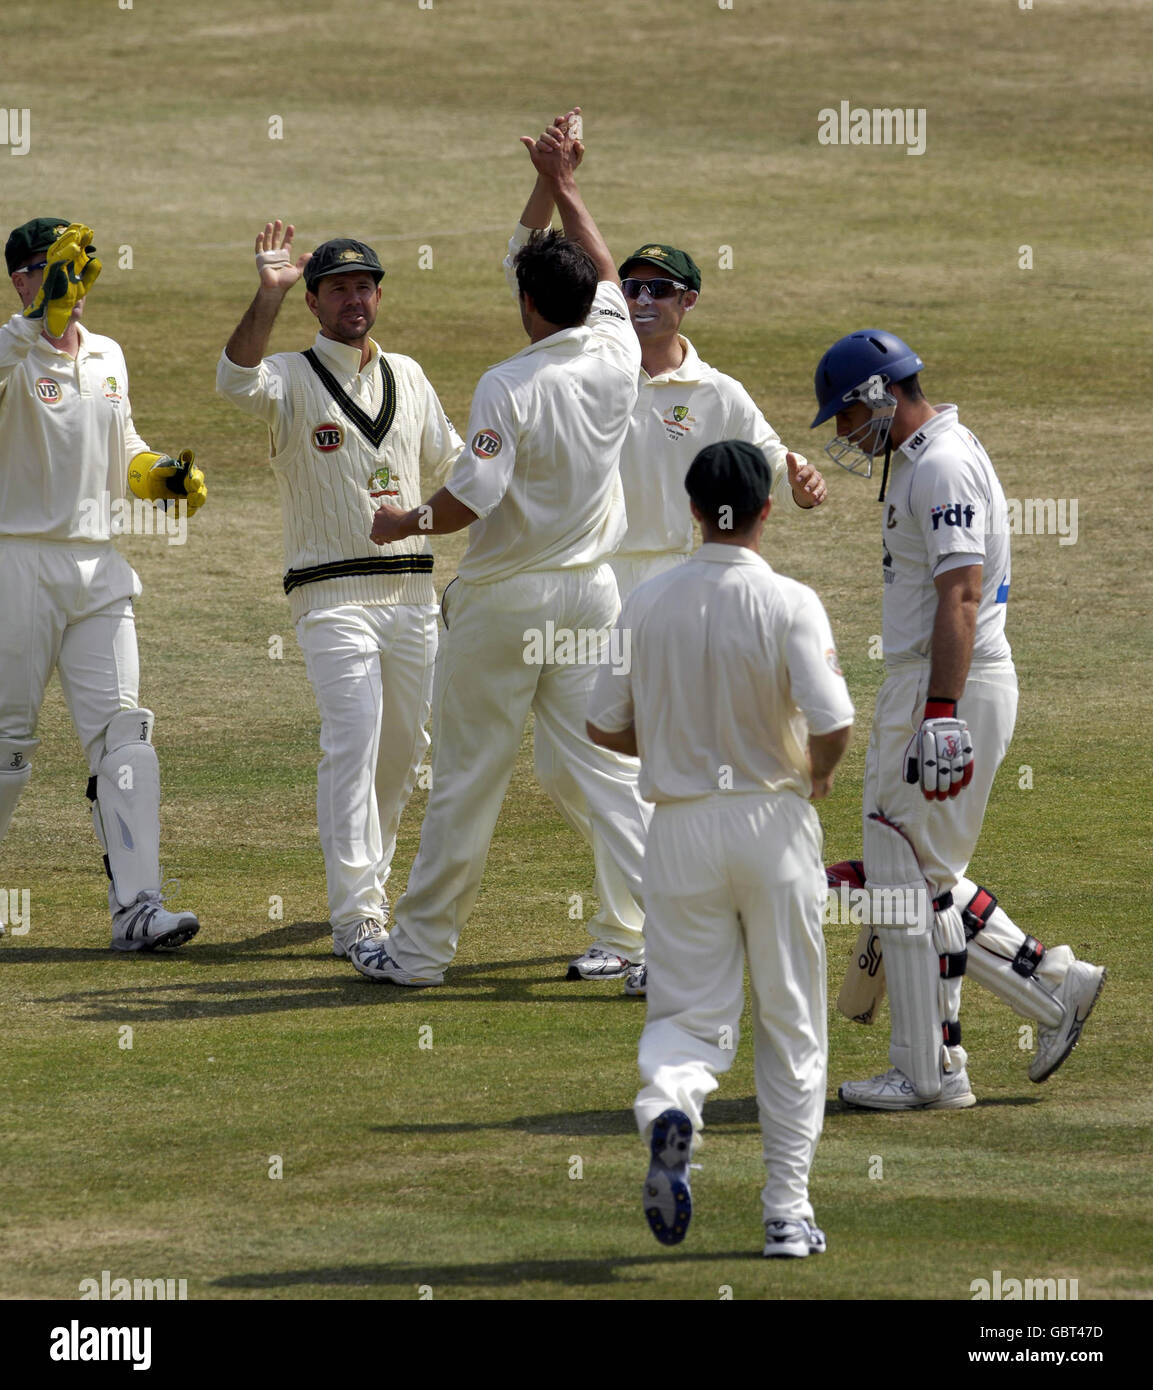 The Australian team celebrate after taking the wicket of Sussex's Michael Yardy (right) off the bowling of Australia's Ben Hilfenhaus (centre) during the tour match at the County Ground, Sussex. Stock Photo